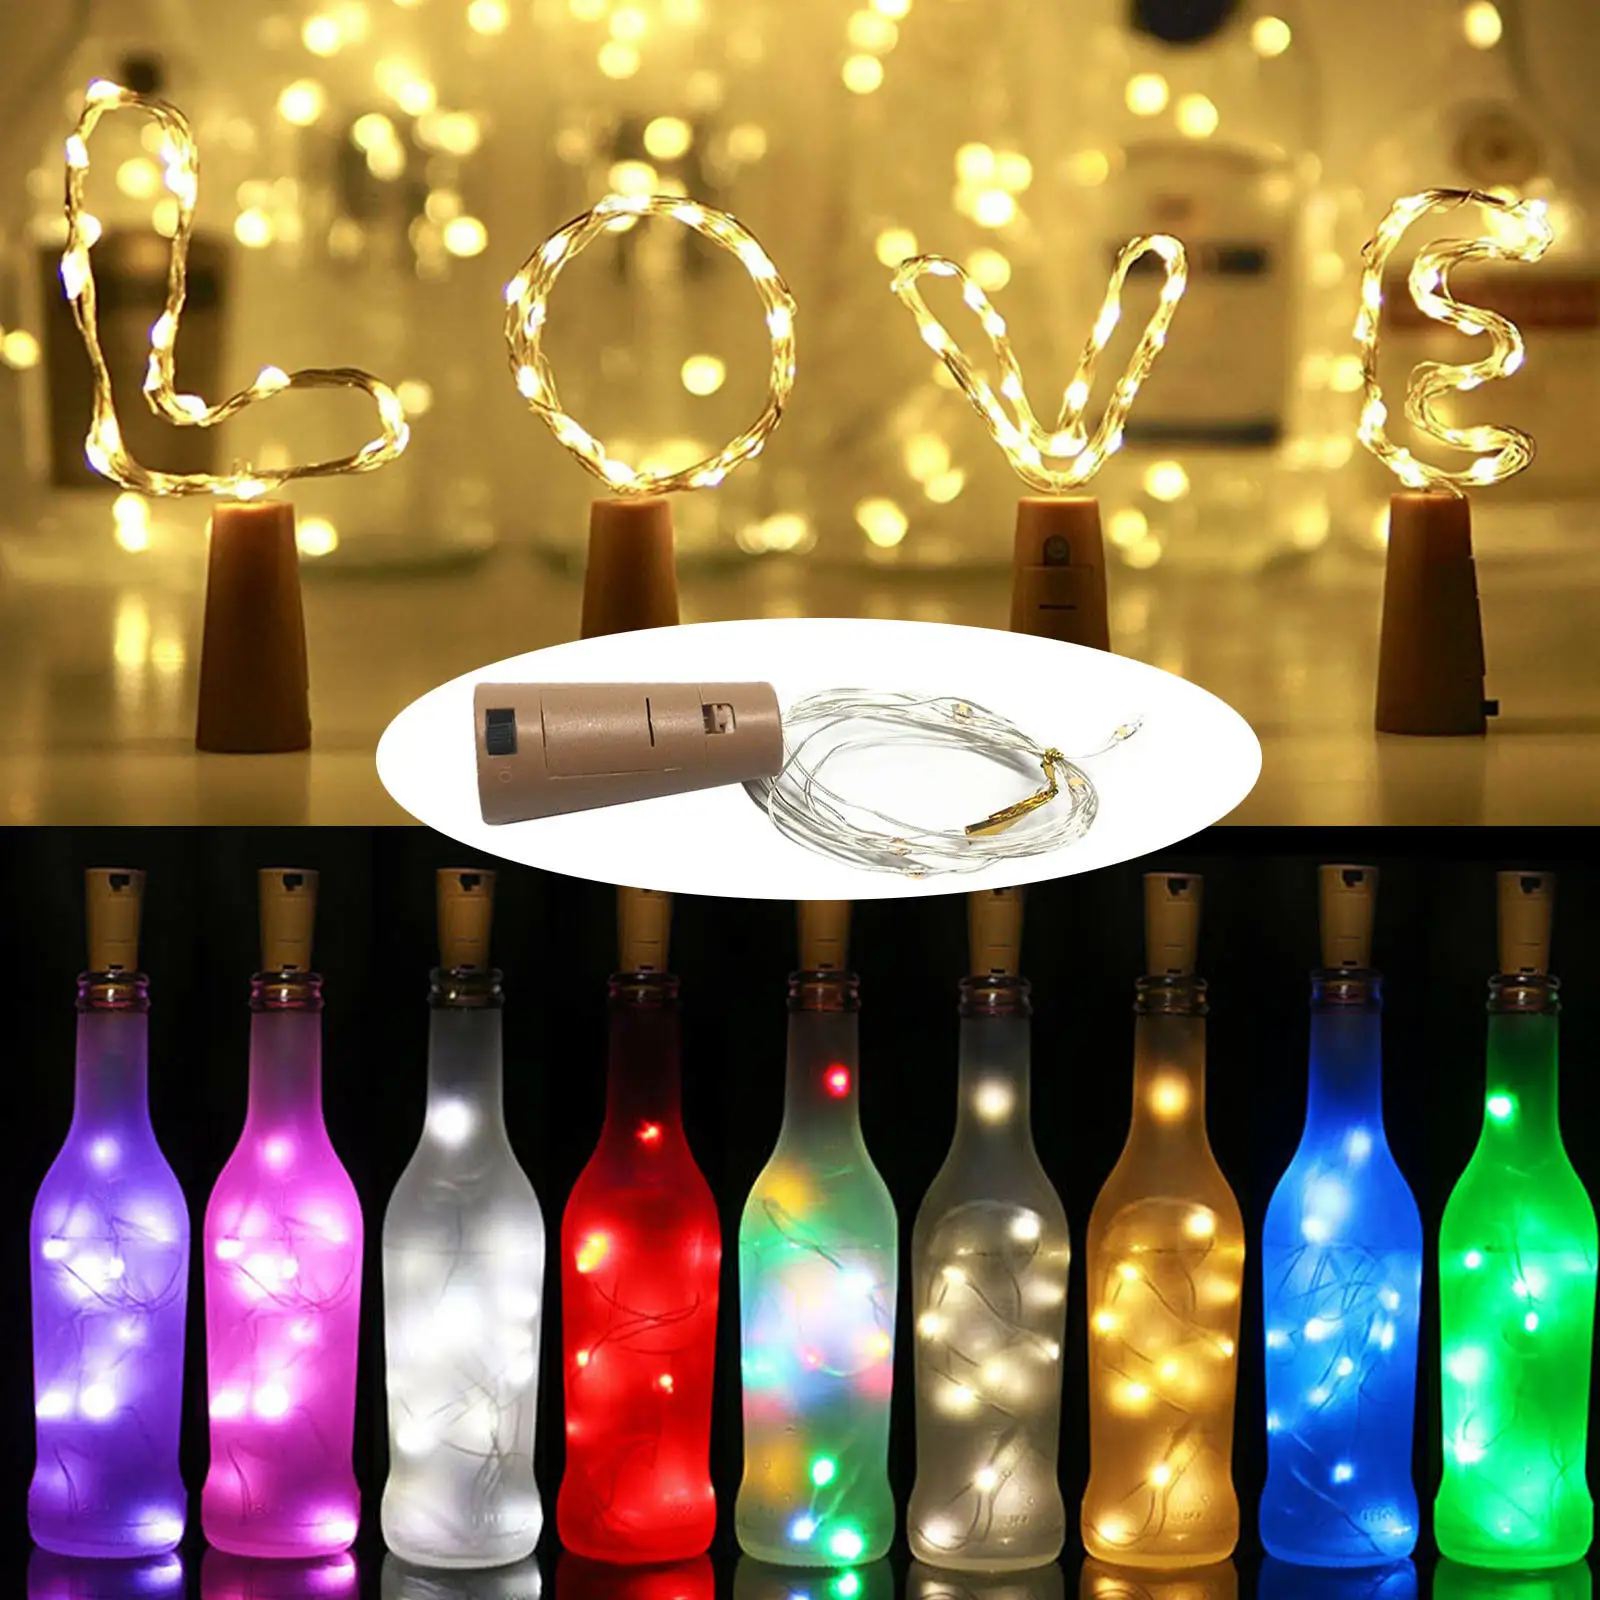 Cork Shaped Wine Bottle LED Silver Copper Wre String Light 1M 10LEDS LR44 Battery Powered For Glass Craft Xmas Party Decoration